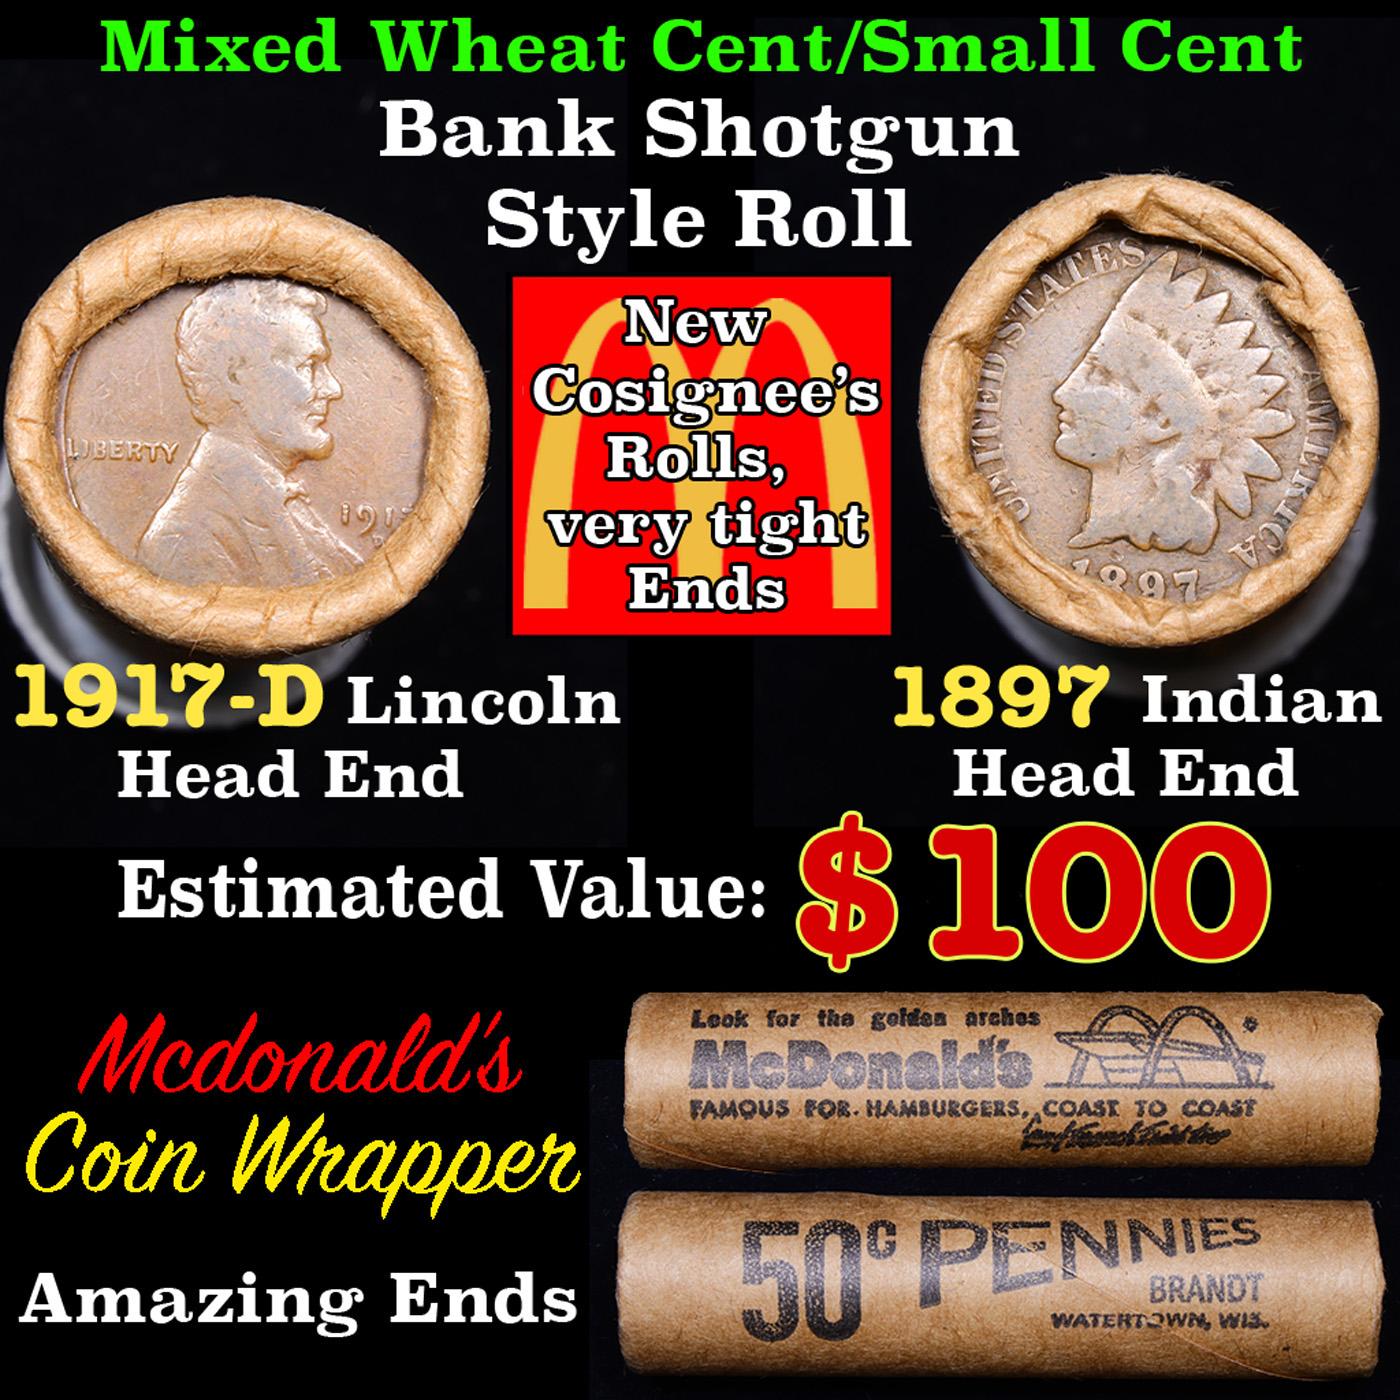 Mixed small cents 1c orig shotgun roll, 1917-d Wheat Cent, 1897 Indian cent other end, McDonalds Wra